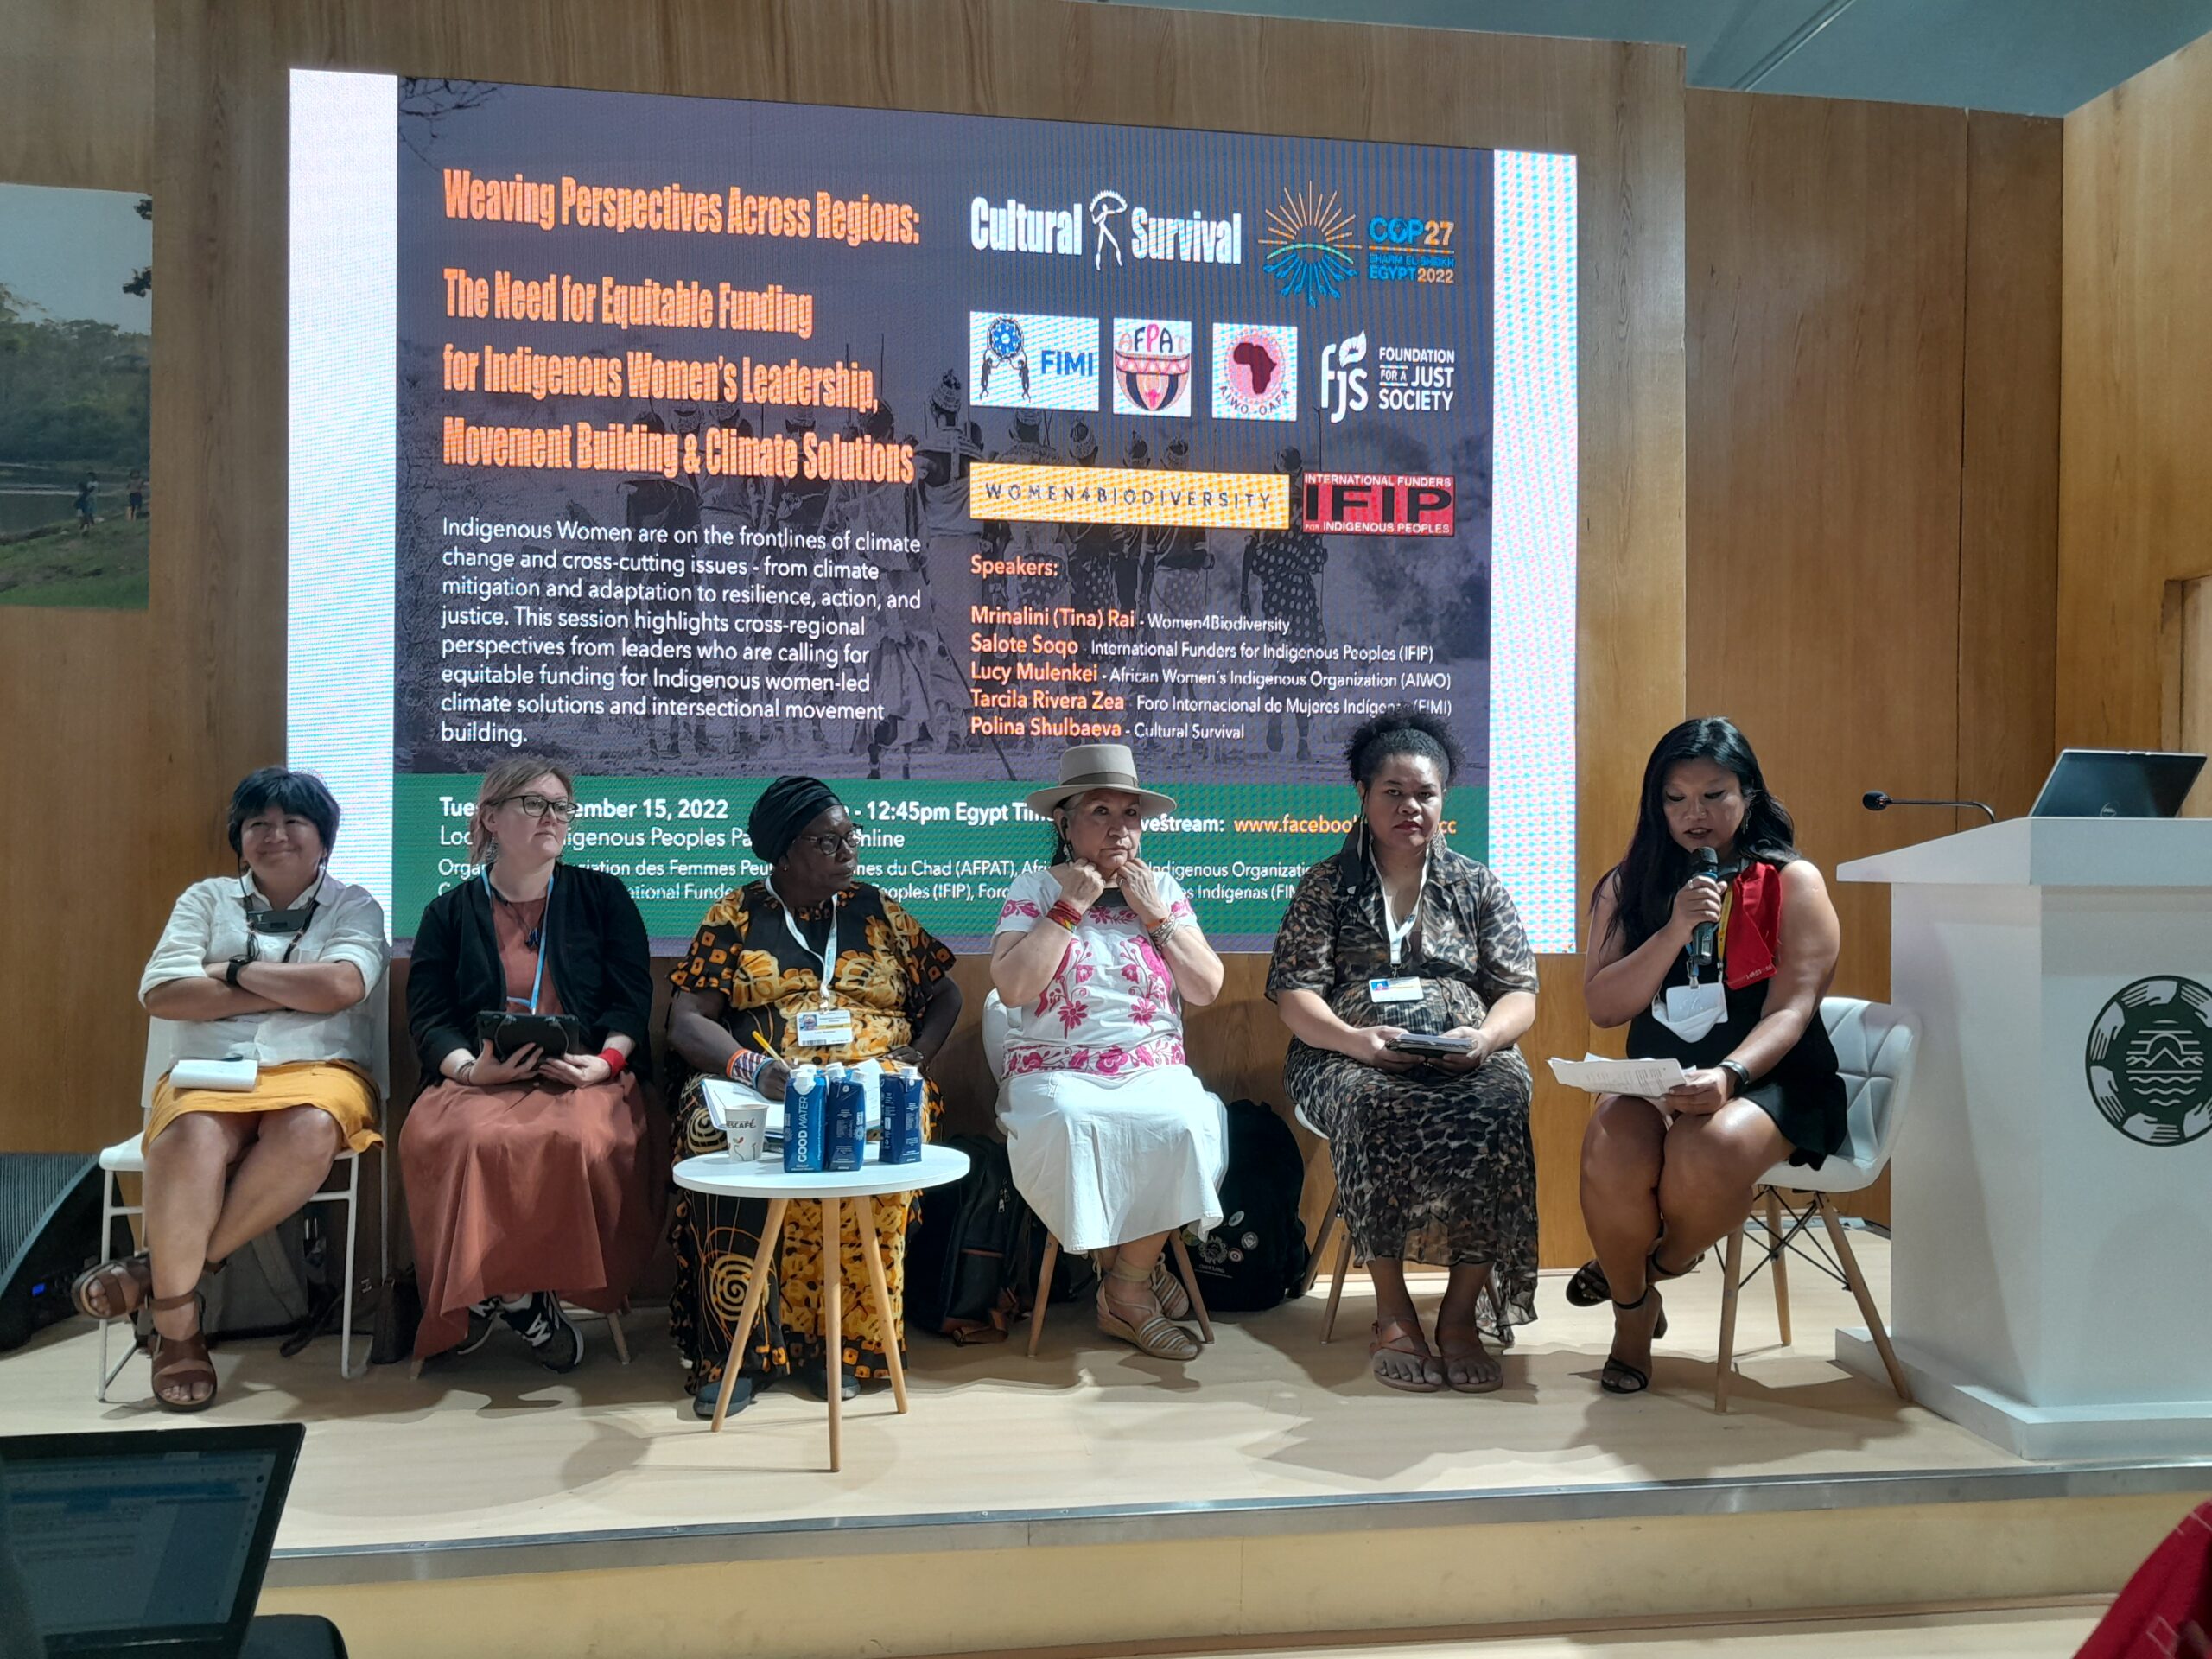 Indigenous Women are on frontlines of climate change and cross cutting issues from climate mitigation and adaptation to resilience,action and justice